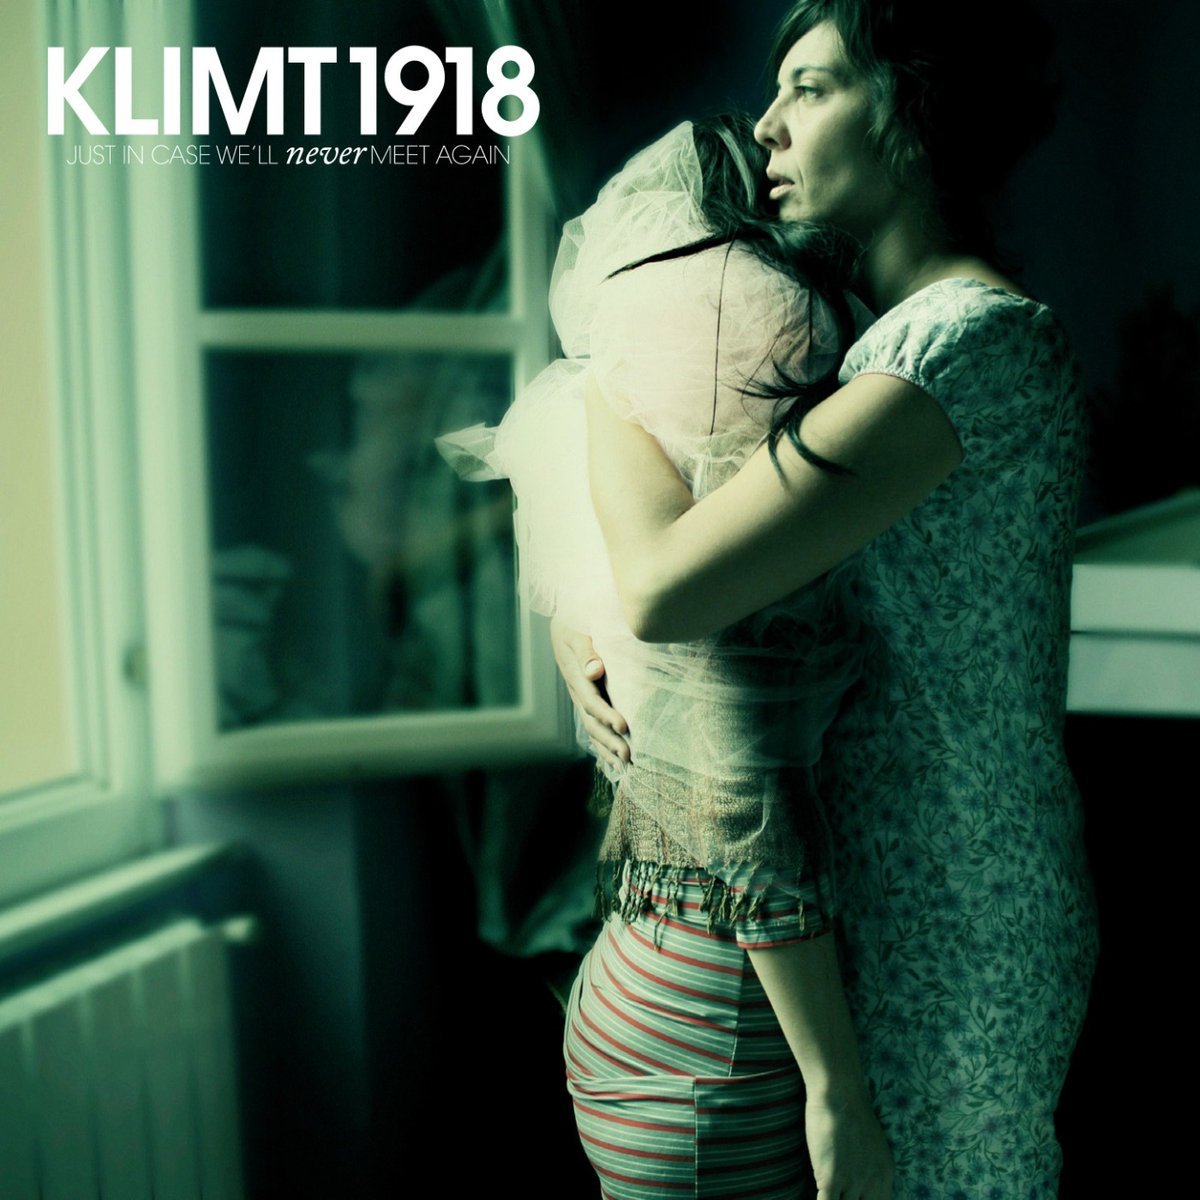 Klimt 1918 - Just in Case We'll Never Meet Again (Soundtrack for the Cassette Generation) (2015) FLAC Download